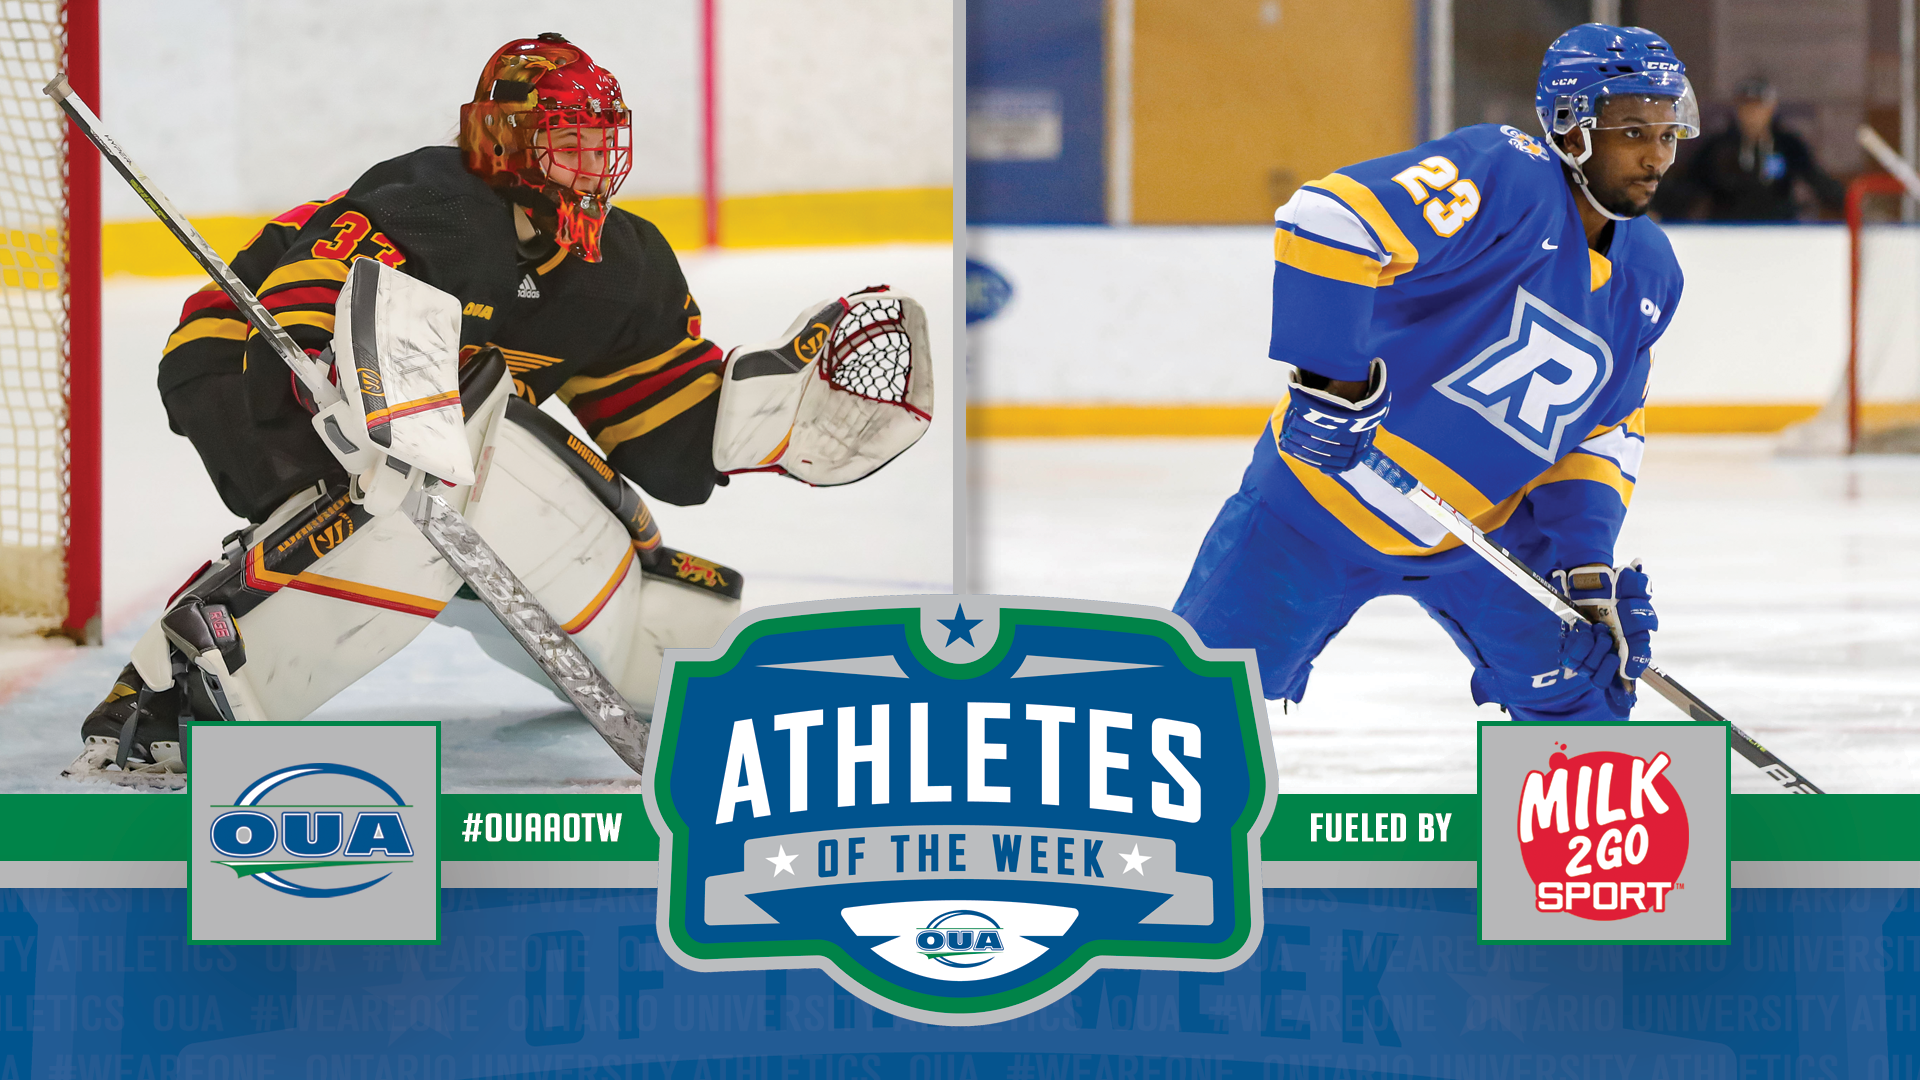 Fedel, Roberts named OUA athletes of the week